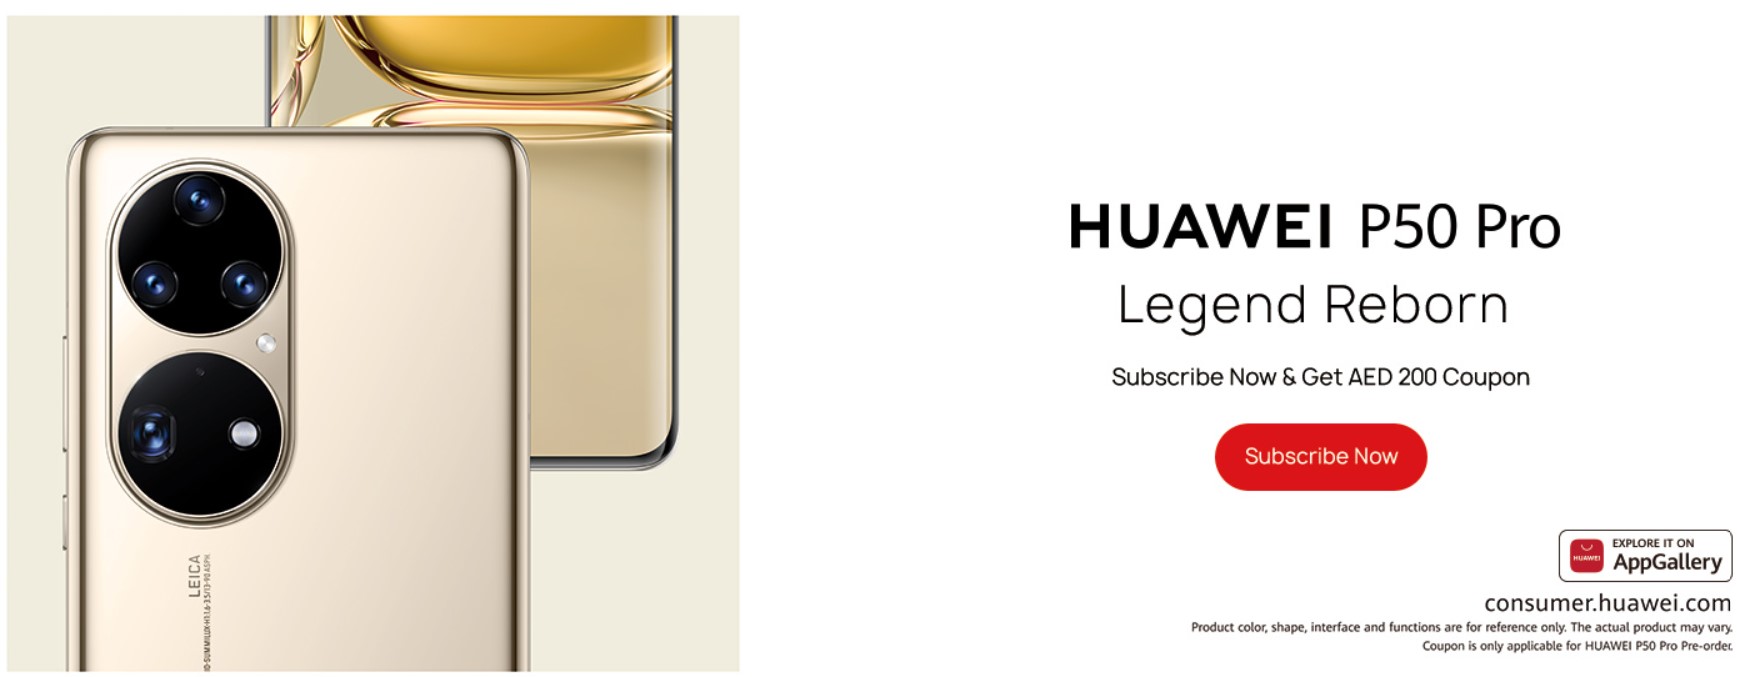 Huawei P50 Pro Middle East